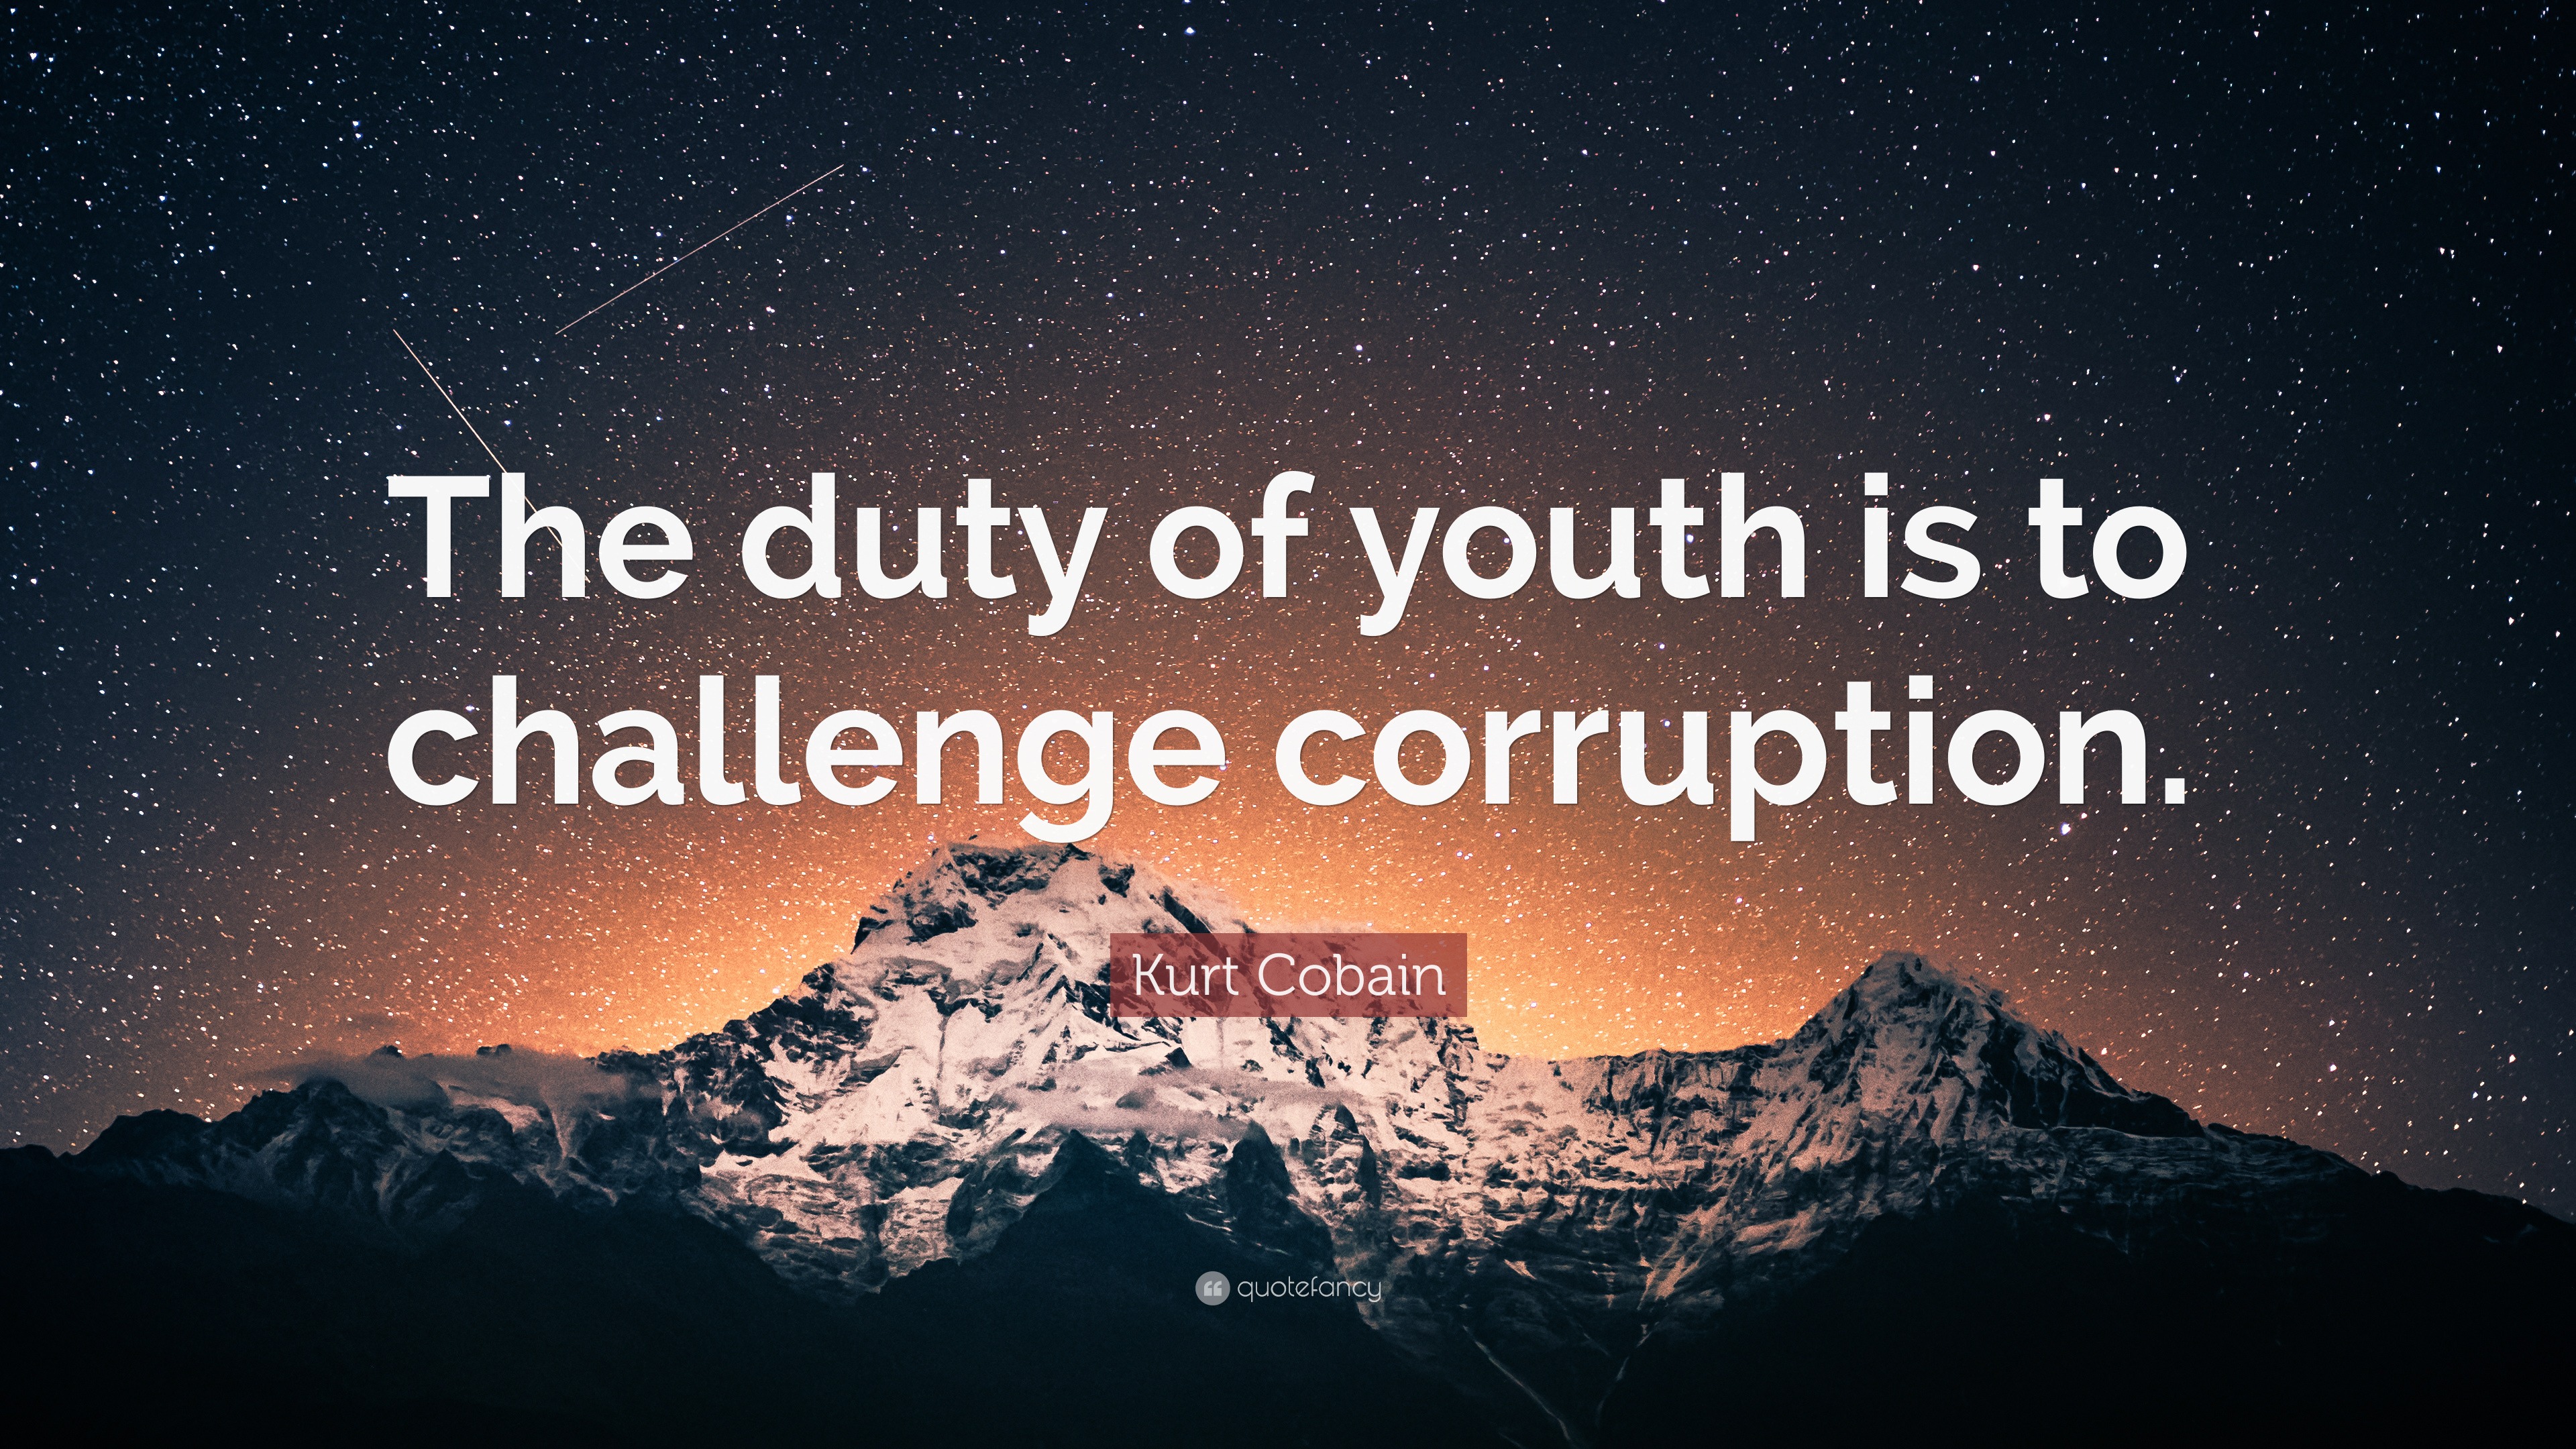 2015970 Kurt Cobain Quote The duty of youth is to challenge corruption